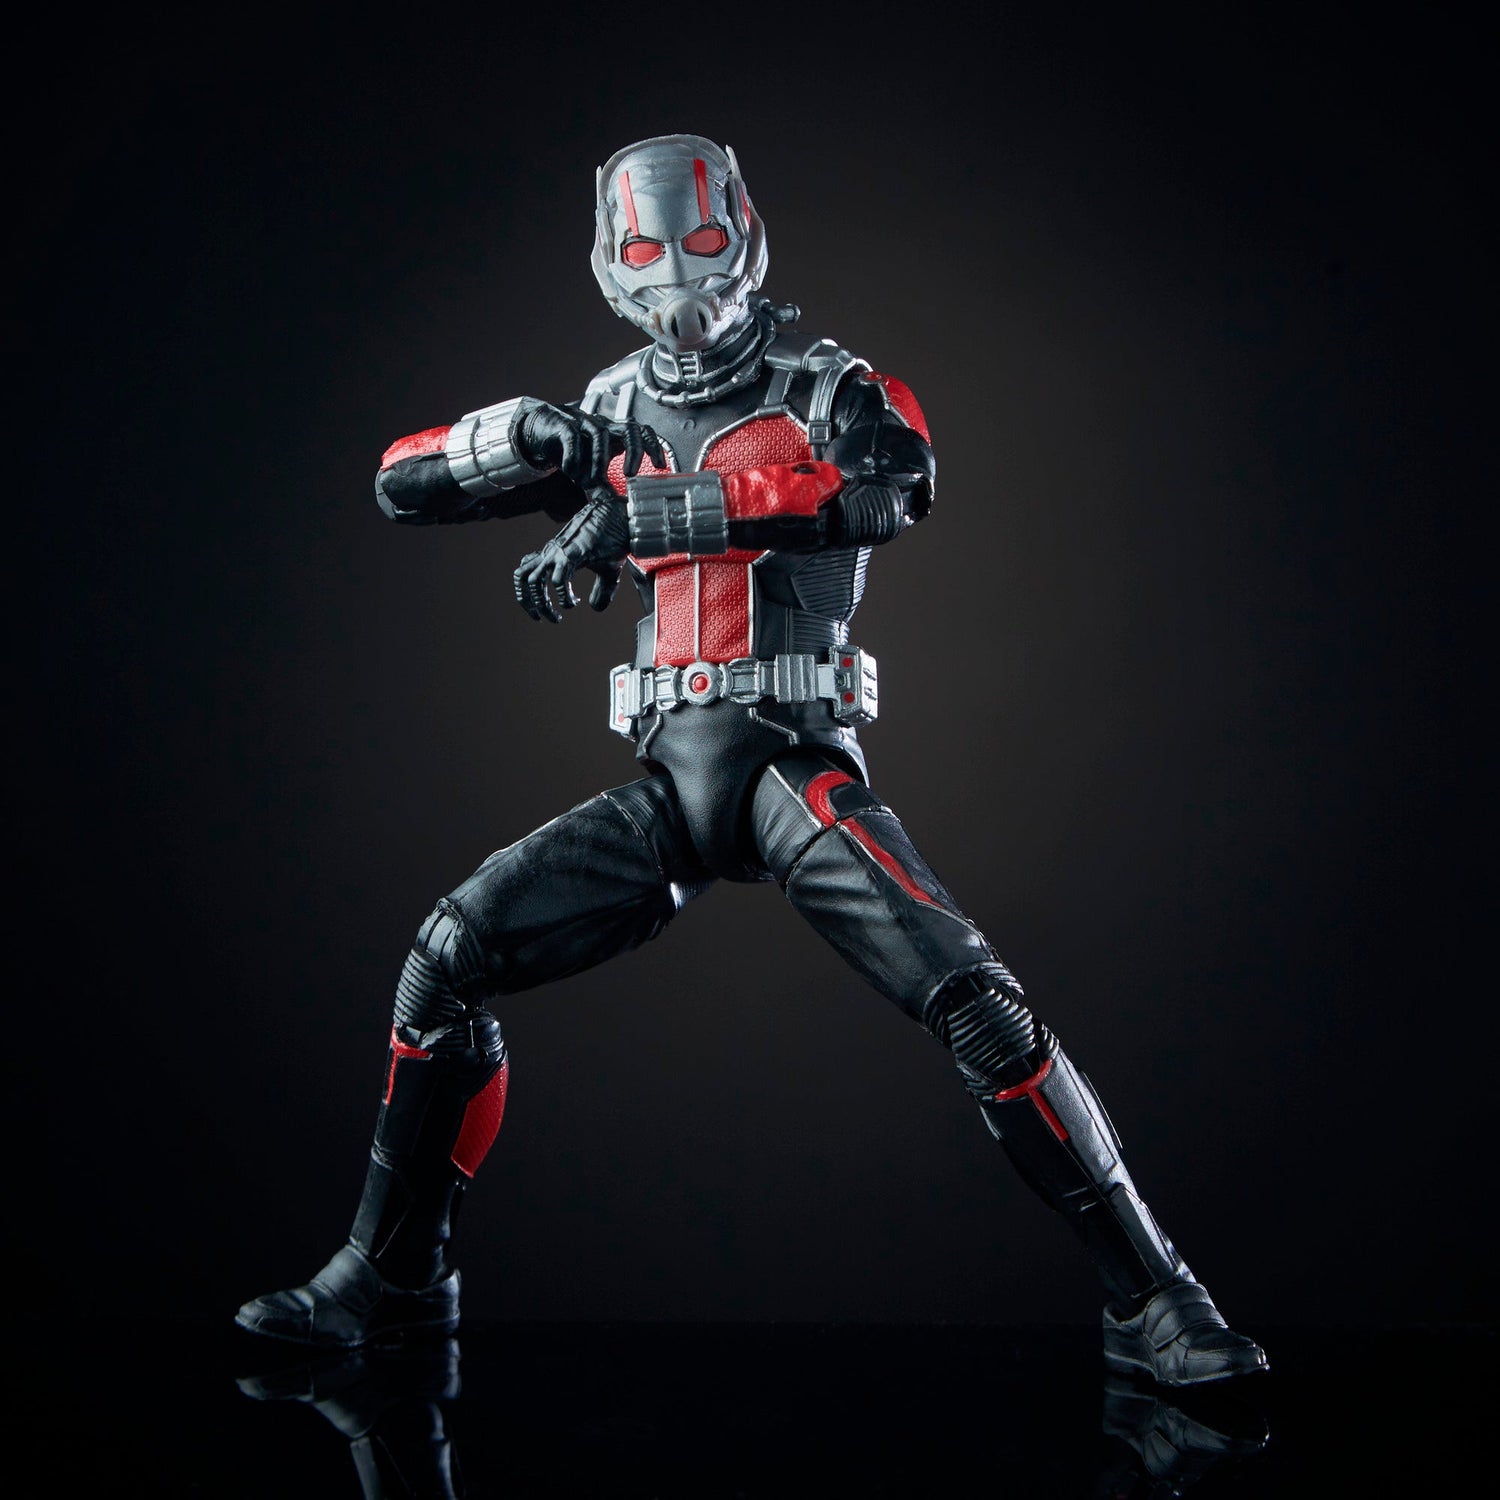 Marvel Studios: The First Ten Years Ant-Man Ant-Man and Yellowjacket Figure